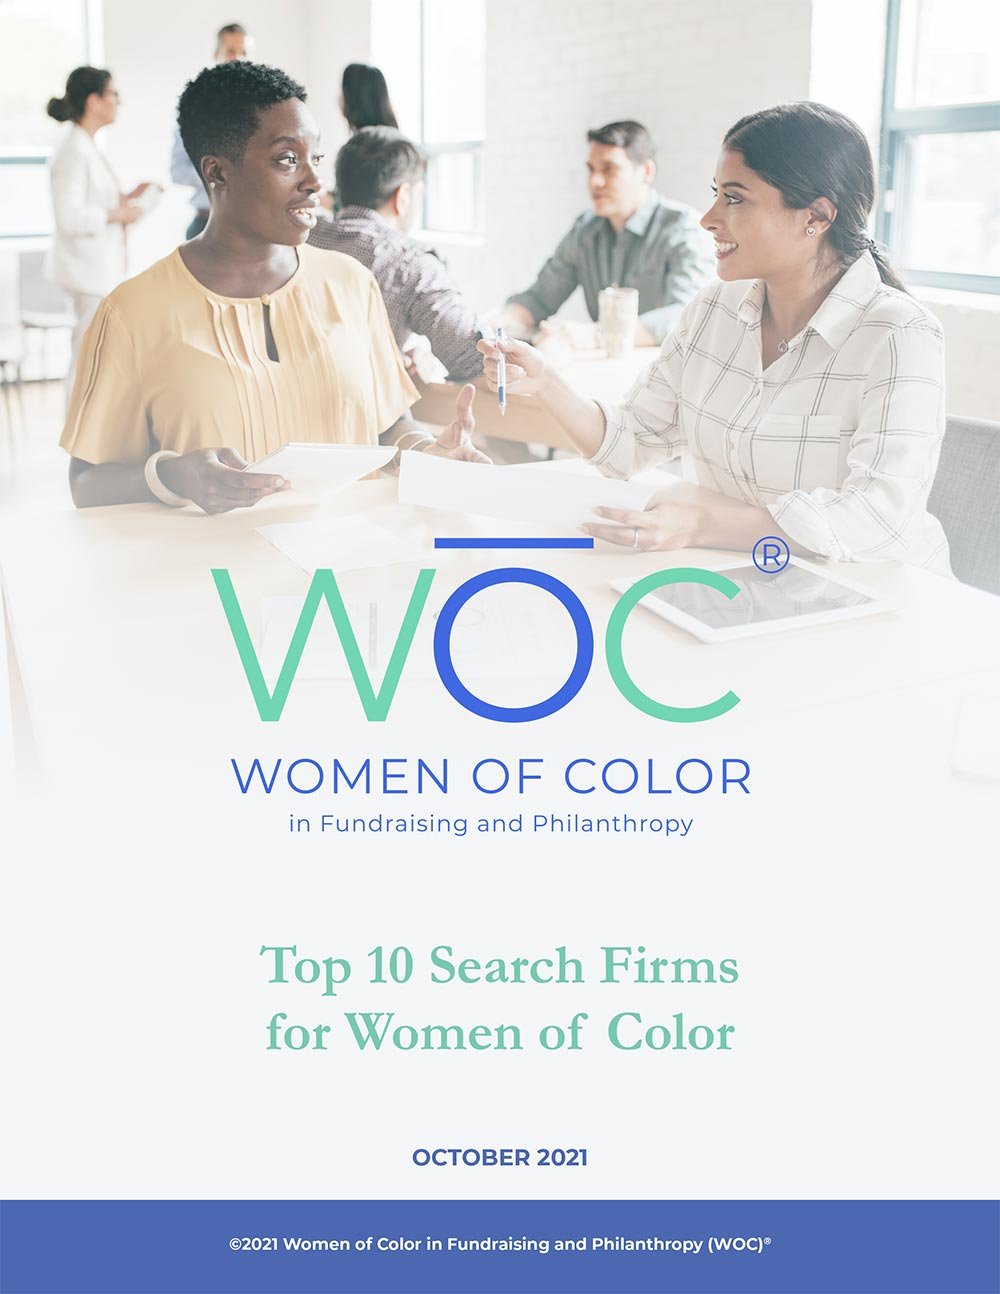 Top 10 Executive Search Firms for Women of Color 2021 Women of Color in Fundraising and Philanthropy (WOC)®